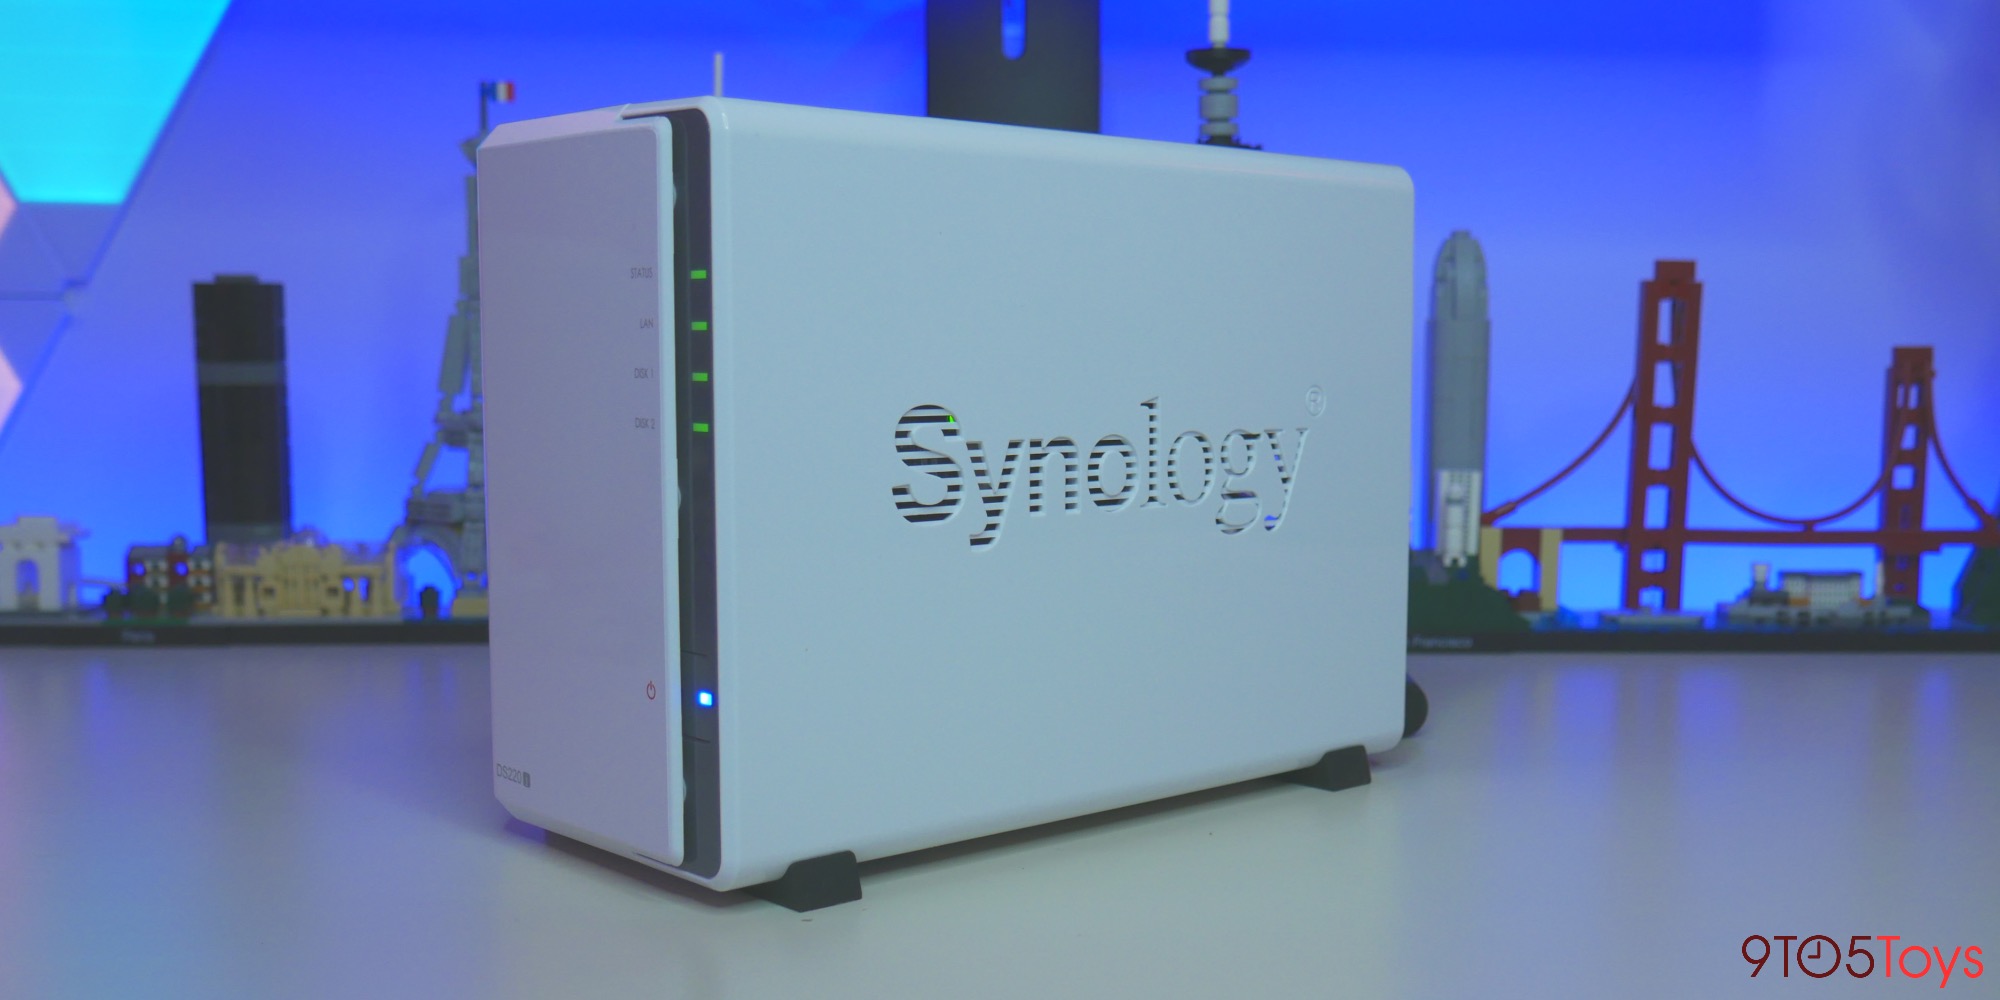 Synology's popular DS220j 2-Bay NAS is perfect for Time Machine